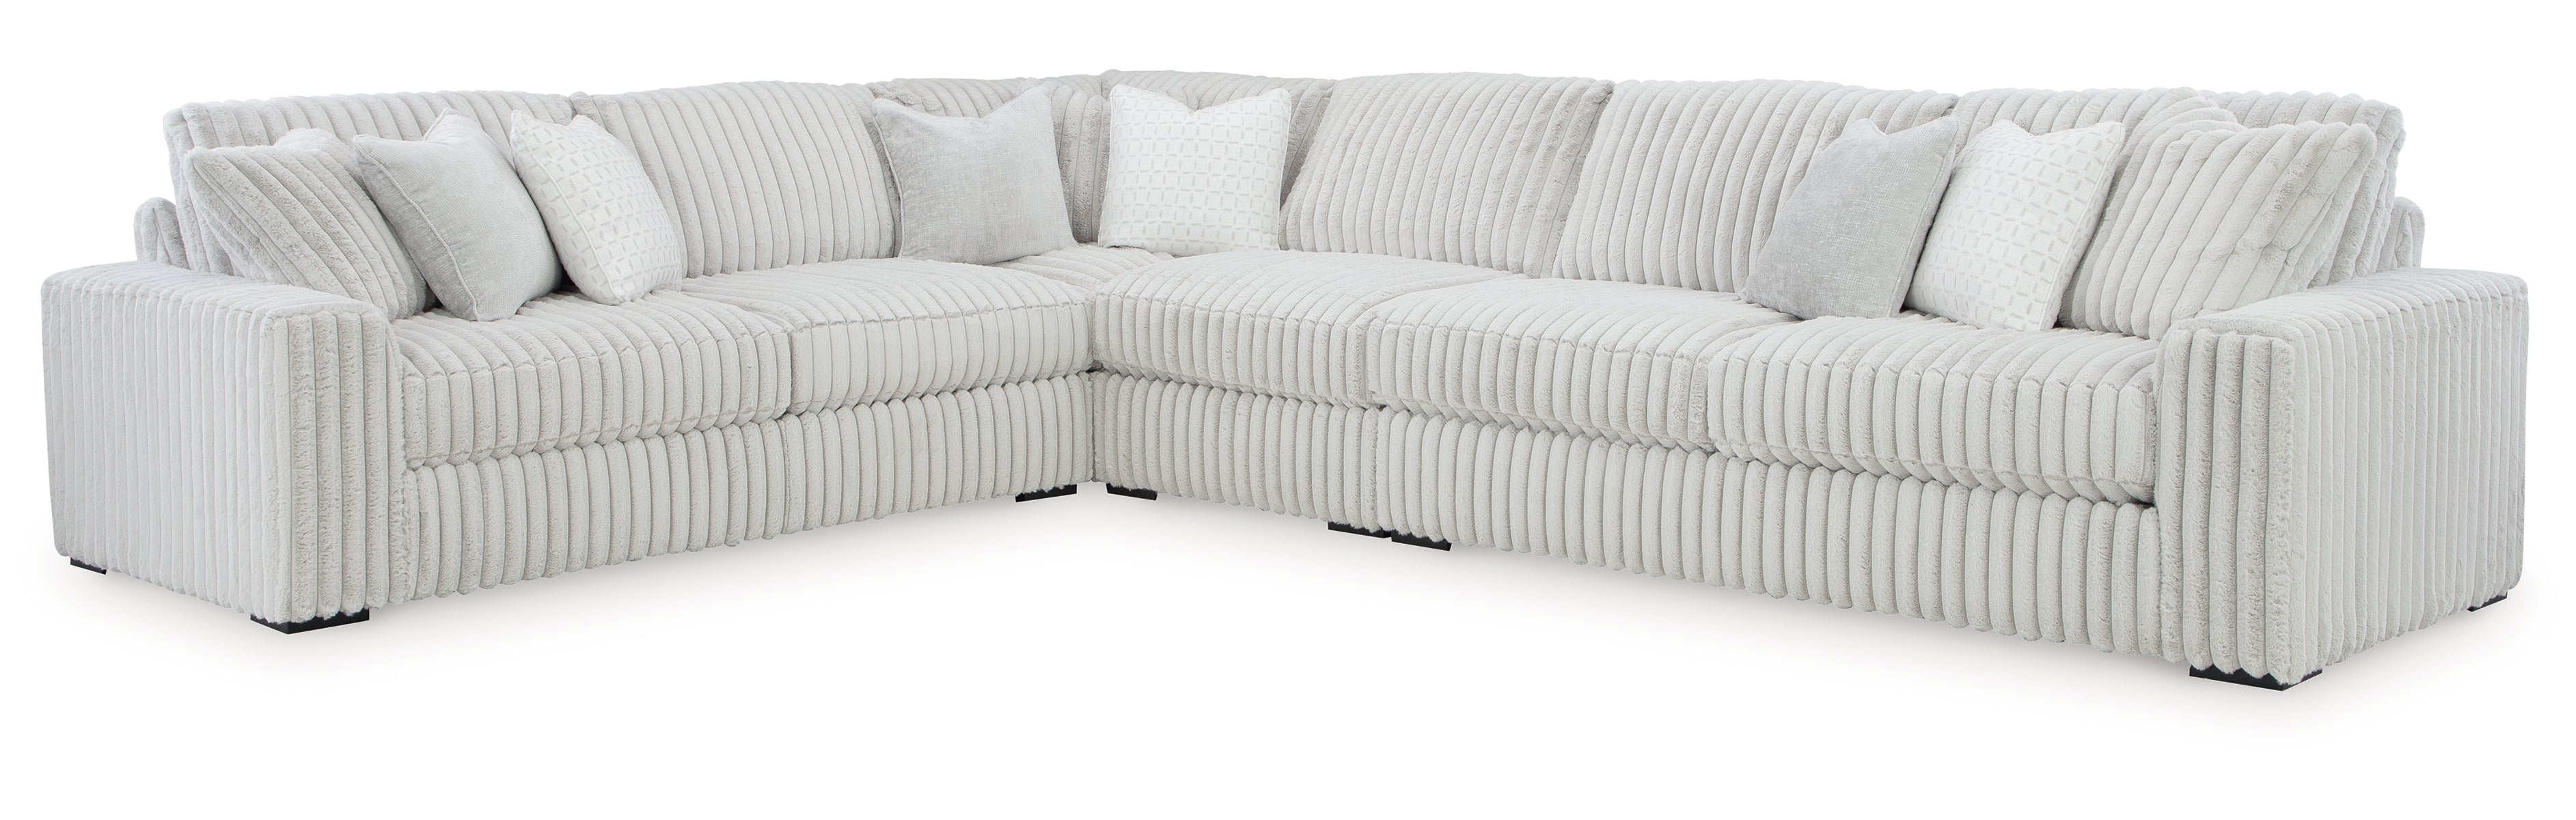 Stupendous 4-Piece Sectional with Ottoman